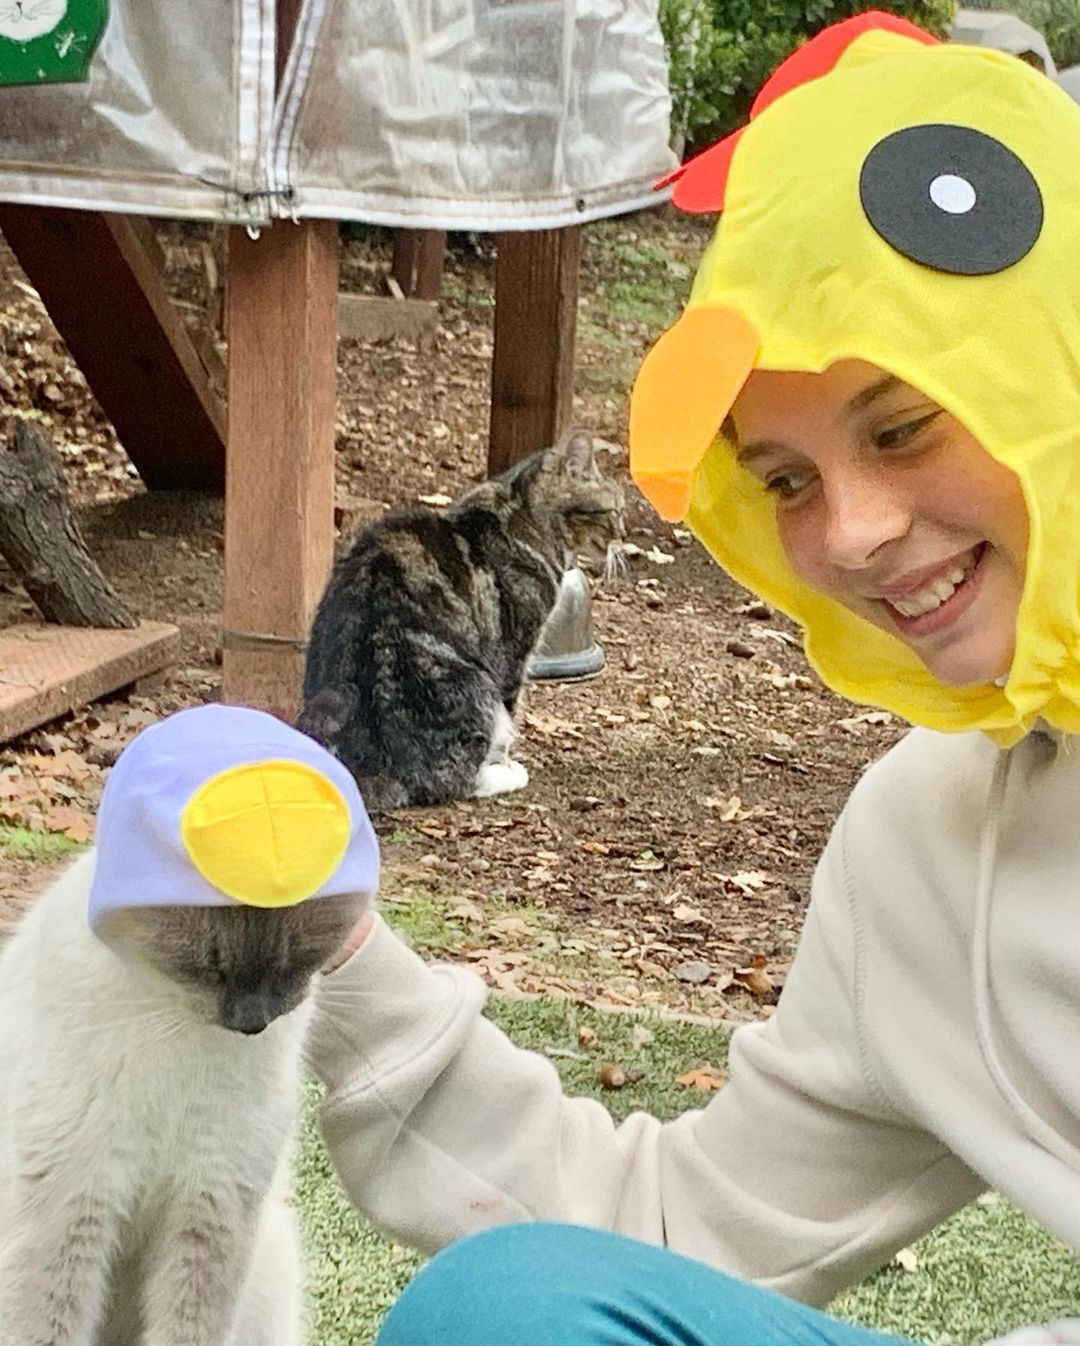 Happy Halloween from kitties at Fat Kitty City Sanctuary! Hope you all had a safe day. We did and we are grateful for the snacks and love the kitties received on this lovely day… The cats were trick-or-treating for Temptations all day!
.
.
.
.
.
.
<a target='_blank' href='https://www.instagram.com/explore/tags/sanctuarylife/'>#sanctuarylife</a> <a target='_blank' href='https://www.instagram.com/explore/tags/rescuekitties/'>#rescuekitties</a> <a target='_blank' href='https://www.instagram.com/explore/tags/fatkittycity/'>#fatkittycity</a> <a target='_blank' href='https://www.instagram.com/explore/tags/fatkittycitysanctuary/'>#fatkittycitysanctuary</a> <a target='_blank' href='https://www.instagram.com/explore/tags/catworld/'>#catworld</a> <a target='_blank' href='https://www.instagram.com/explore/tags/rescuecats/'>#rescuecats</a> <a target='_blank' href='https://www.instagram.com/explore/tags/sanctuary/'>#sanctuary</a> <a target='_blank' href='https://www.instagram.com/explore/tags/catrescue/'>#catrescue</a> <a target='_blank' href='https://www.instagram.com/explore/tags/helpingcats/'>#helpingcats</a> <a target='_blank' href='https://www.instagram.com/explore/tags/eldoradohills/'>#eldoradohills</a> <a target='_blank' href='https://www.instagram.com/explore/tags/folsomca/'>#folsomca</a> <a target='_blank' href='https://www.instagram.com/explore/tags/lifesanctuary/'>#lifesanctuary</a> <a target='_blank' href='https://www.instagram.com/explore/tags/catadoptions/'>#catadoptions</a> <a target='_blank' href='https://www.instagram.com/explore/tags/rescuecatsofinstagram/'>#rescuecatsofinstagram</a> <a target='_blank' href='https://www.instagram.com/explore/tags/specialneedscats/'>#specialneedscats</a> <a target='_blank' href='https://www.instagram.com/explore/tags/cateyes/'>#cateyes</a> <a target='_blank' href='https://www.instagram.com/explore/tags/feralrescues/'>#feralrescues</a> <a target='_blank' href='https://www.instagram.com/explore/tags/nonprofitsanctuary/'>#nonprofitsanctuary</a> <a target='_blank' href='https://www.instagram.com/explore/tags/5freedoms/'>#5freedoms</a> <a target='_blank' href='https://www.instagram.com/explore/tags/catsincostumes/'>#catsincostumes</a> <a target='_blank' href='https://www.instagram.com/explore/tags/funnycats/'>#funnycats</a> <a target='_blank' href='https://www.instagram.com/explore/tags/halloweencostume/'>#halloweencostume</a> <a target='_blank' href='https://www.instagram.com/explore/tags/halloween2021/'>#halloween2021</a>